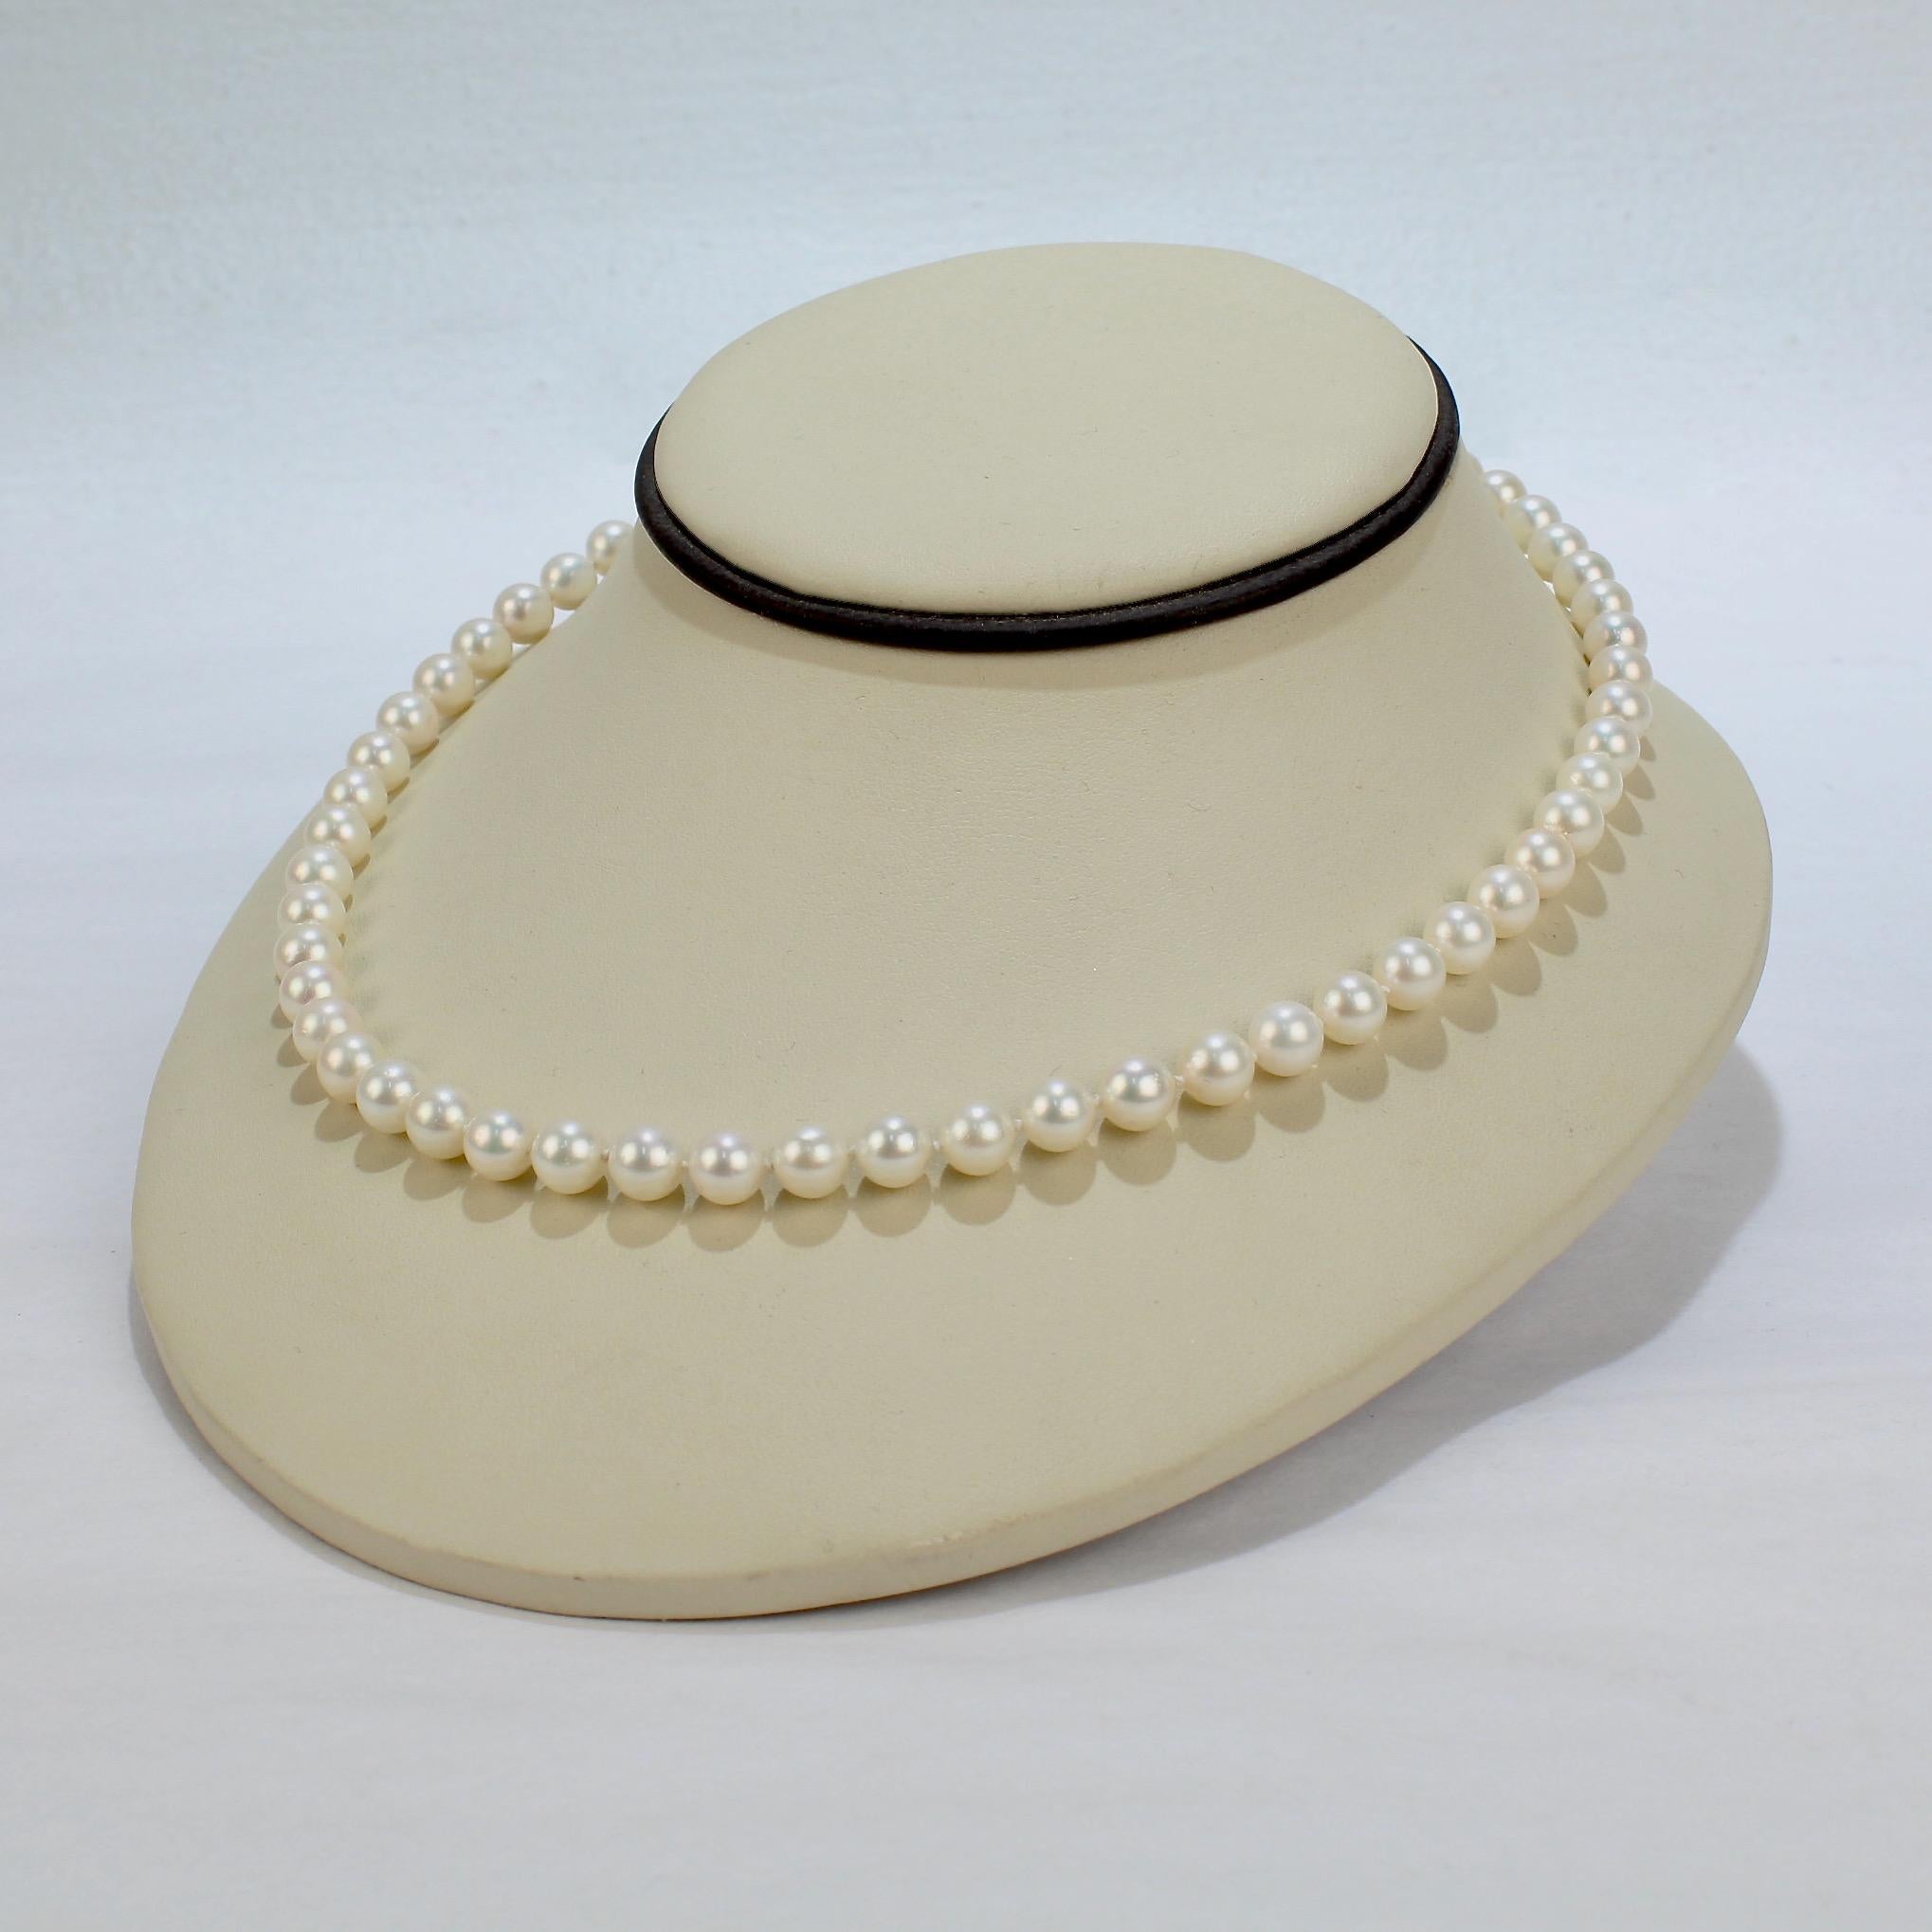 Edwardian Vintage Pearl Strand Necklace with Cultured Pearls and a 14 Karat Gold Clasp